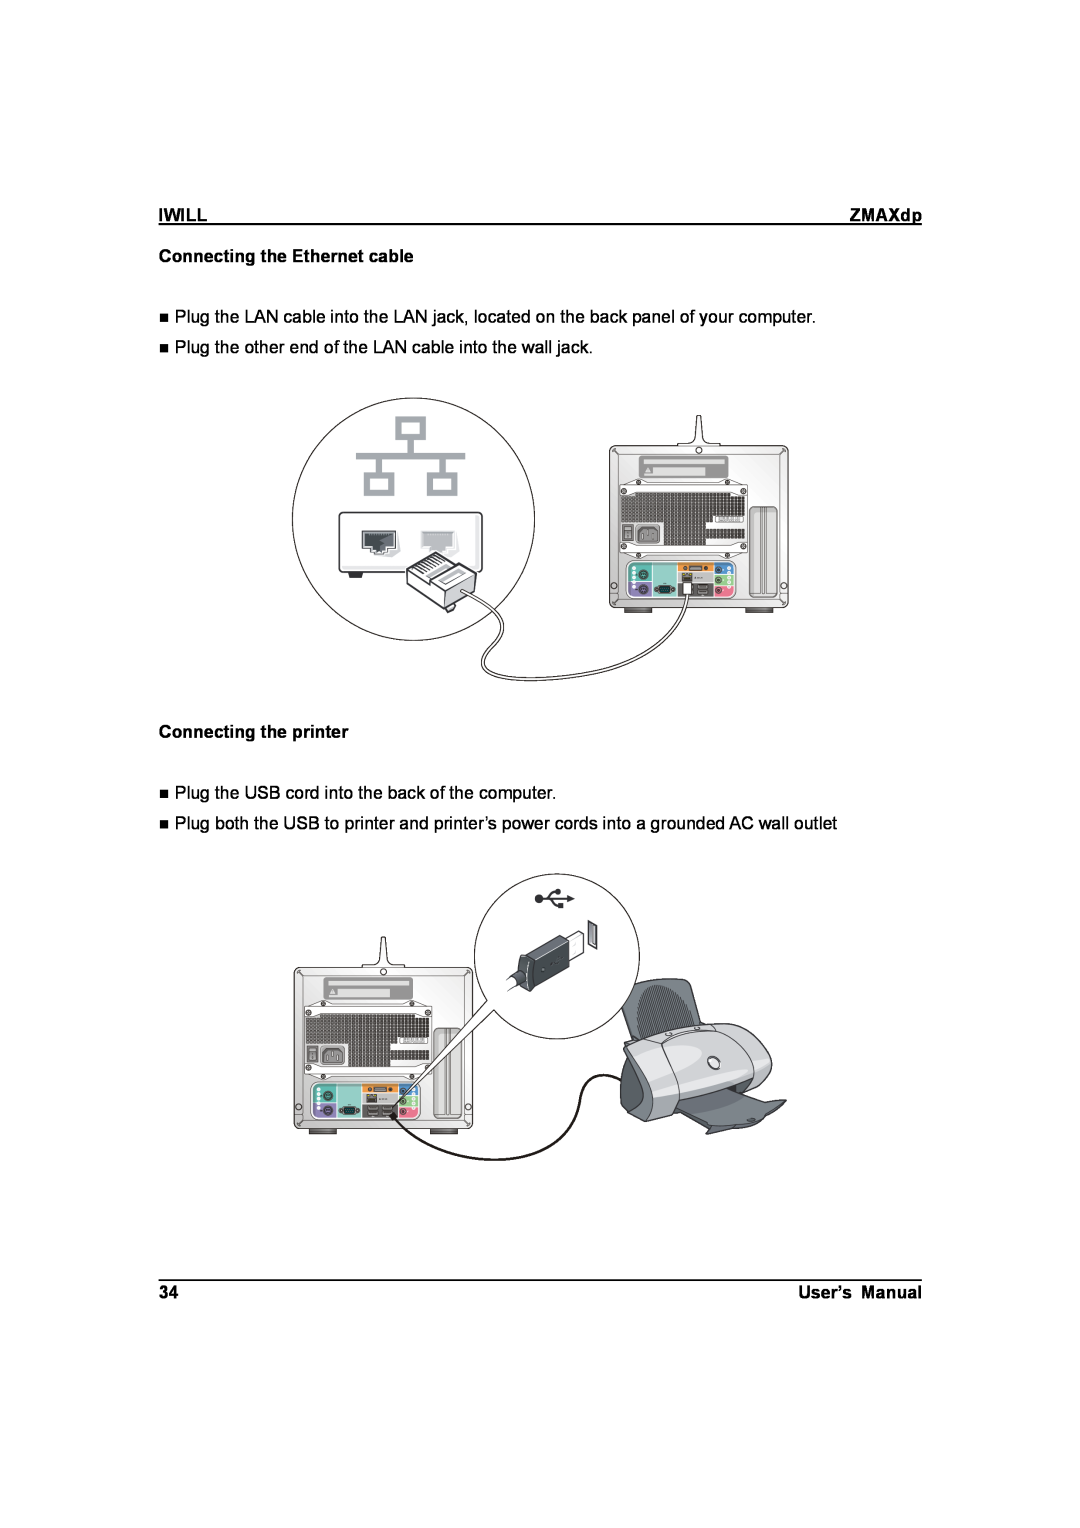 IBM ZMAXdp user manual Iwill, Connecting the Ethernet cable, Connecting the printer, User’s Manual 